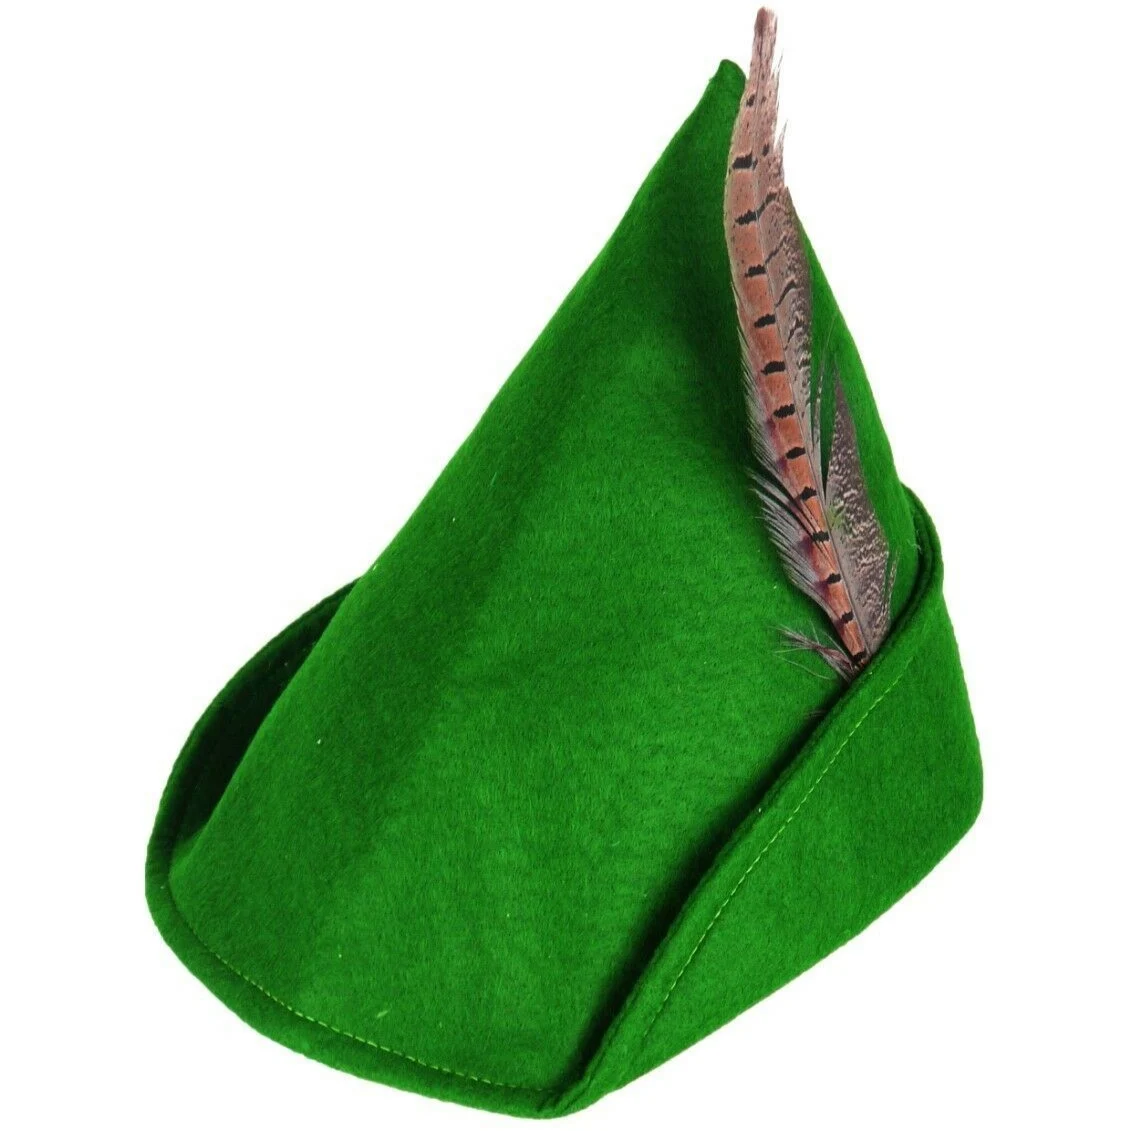 ADULT FANCY DRESS ROBIN HOOD GREEN HAT PETER PAN CAP FEATHER MEDIEVAL BYCOCKET 